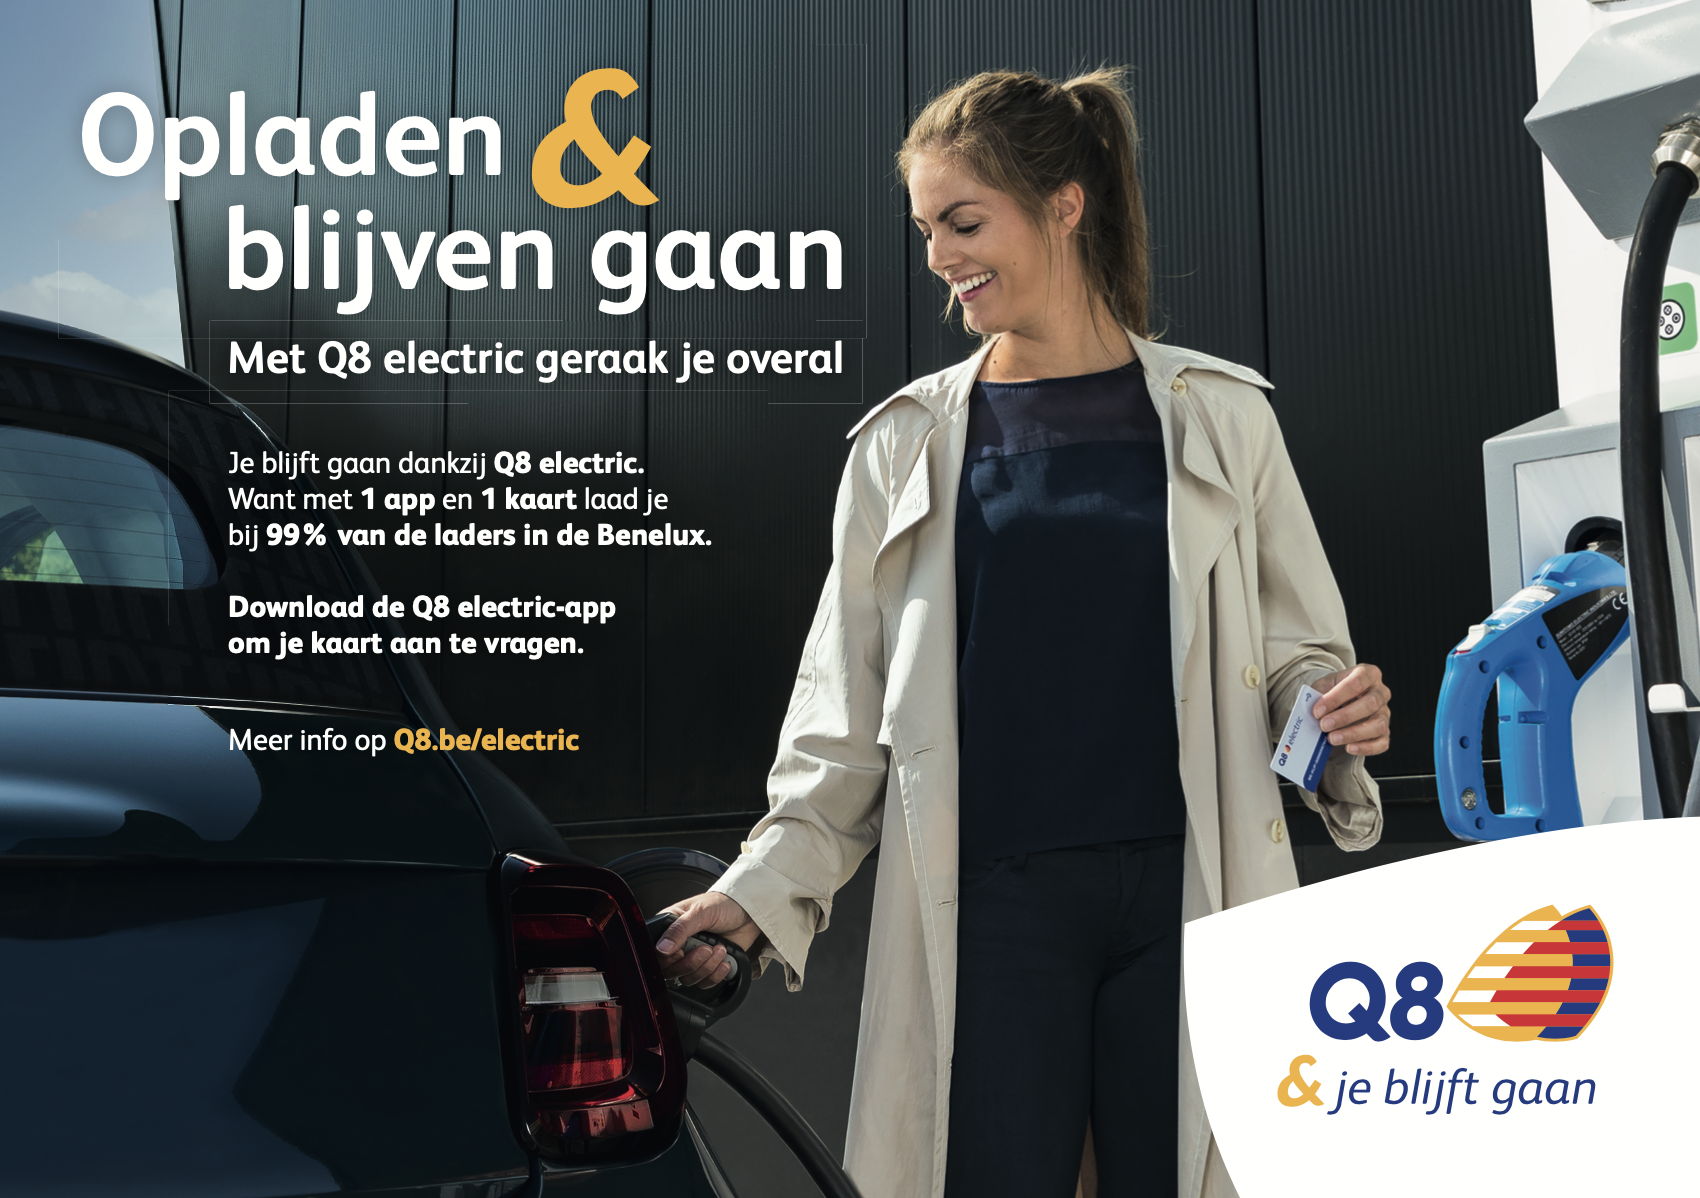 Q8 electric: always fully charged